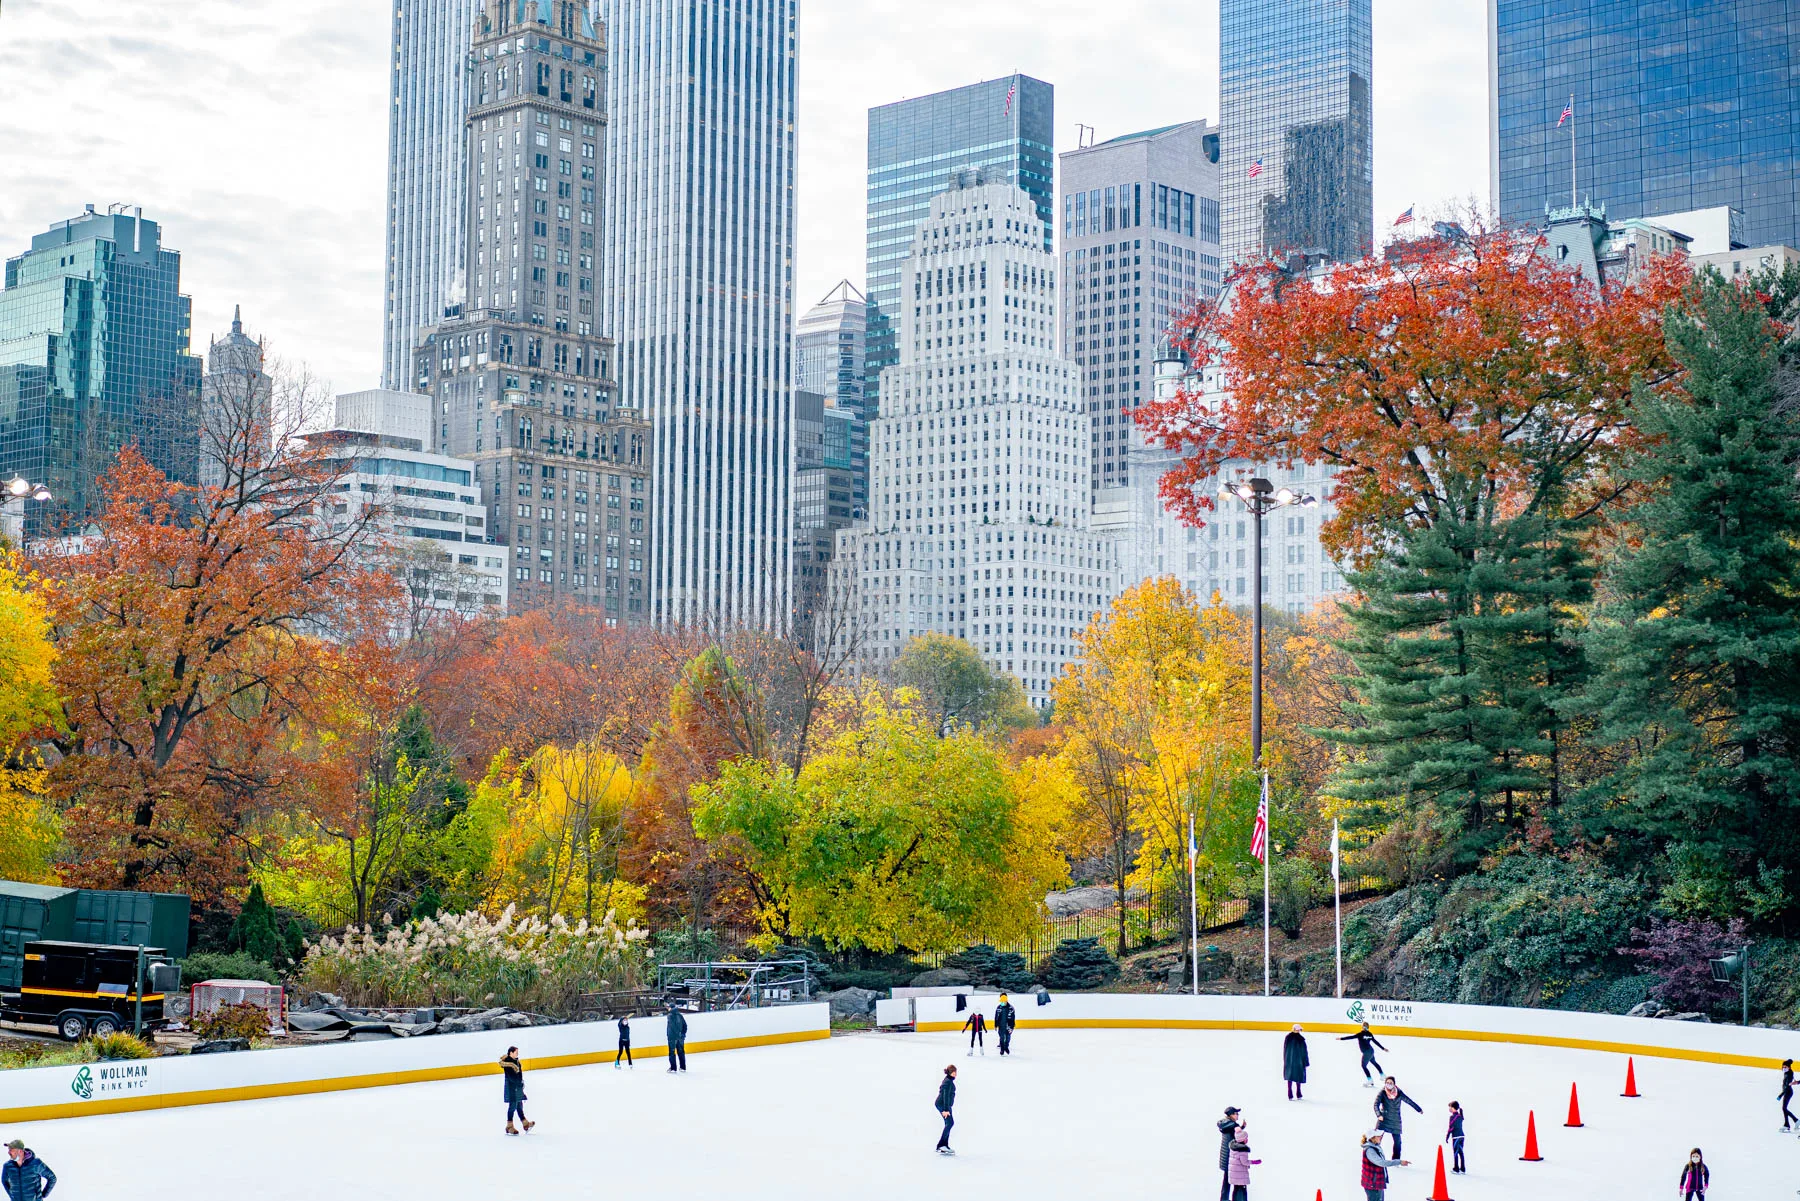 Ice skating in Central Park NYC